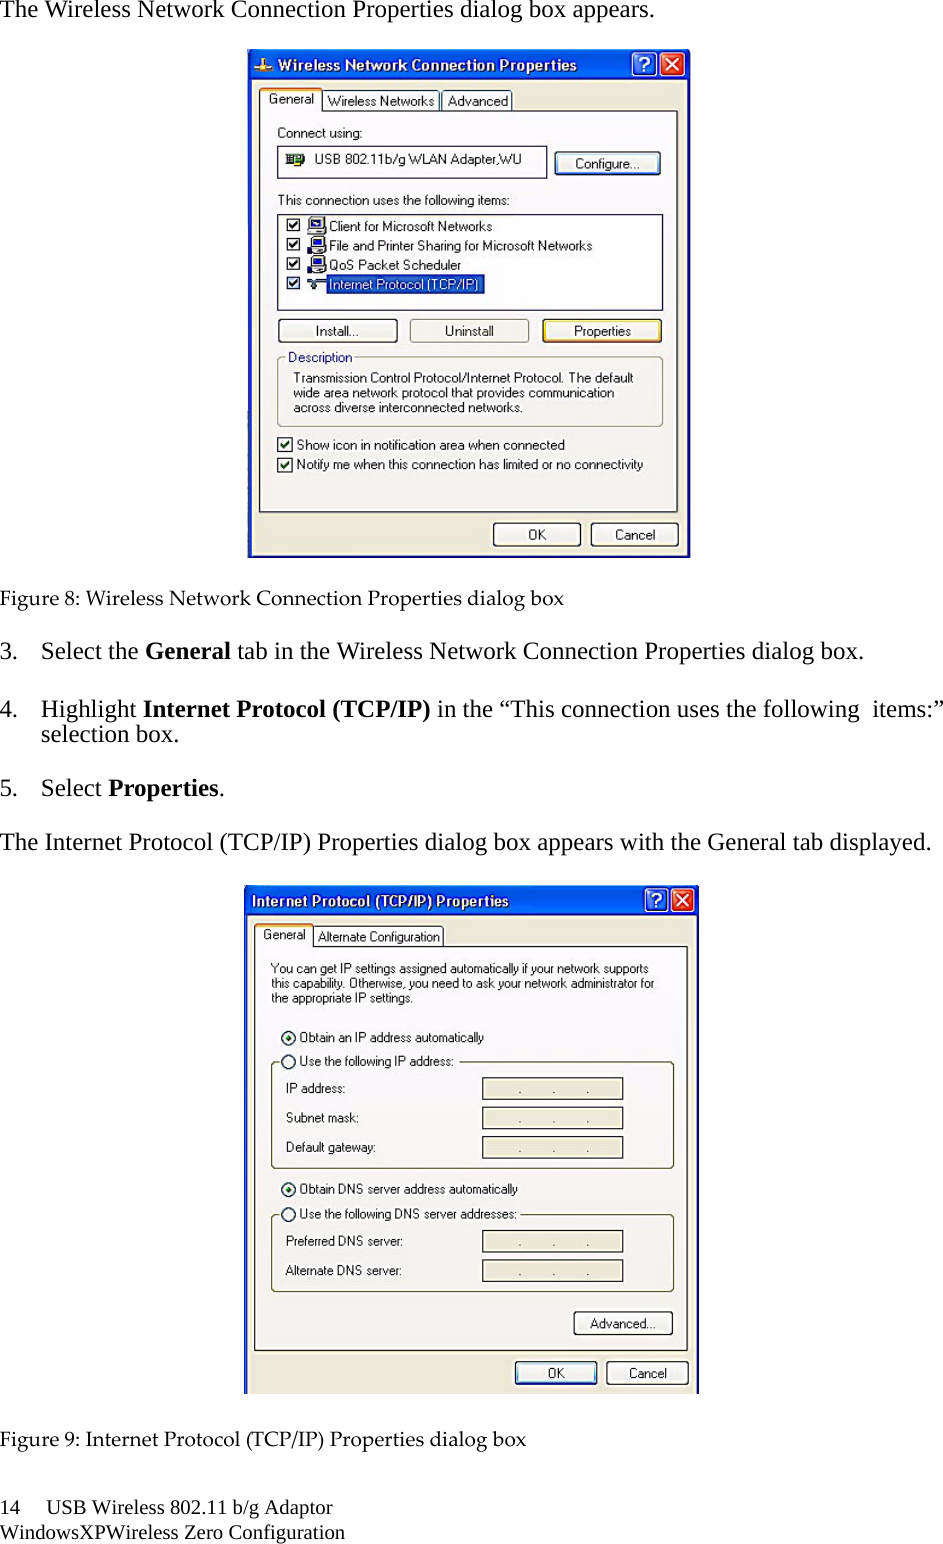 14     USB Wireless 802.11 b/g AdaptorWindowsXPWireless Zero ConfigurationThe Wireless Network Connection Properties dialog box appears.Figure8:WirelessNetworkConnectionPropertiesdialogbox3. Select the General tab in the Wireless Network Connection Properties dialog box.4. Highlight Internet Protocol (TCP/IP) in the “This connection uses the following items:”selection box.5. Select Properties.The Internet Protocol (TCP/IP) Properties dialog box appears with the General tab displayed.Figure9:InternetProtocol(TCP/IP)Propertiesdialogbox